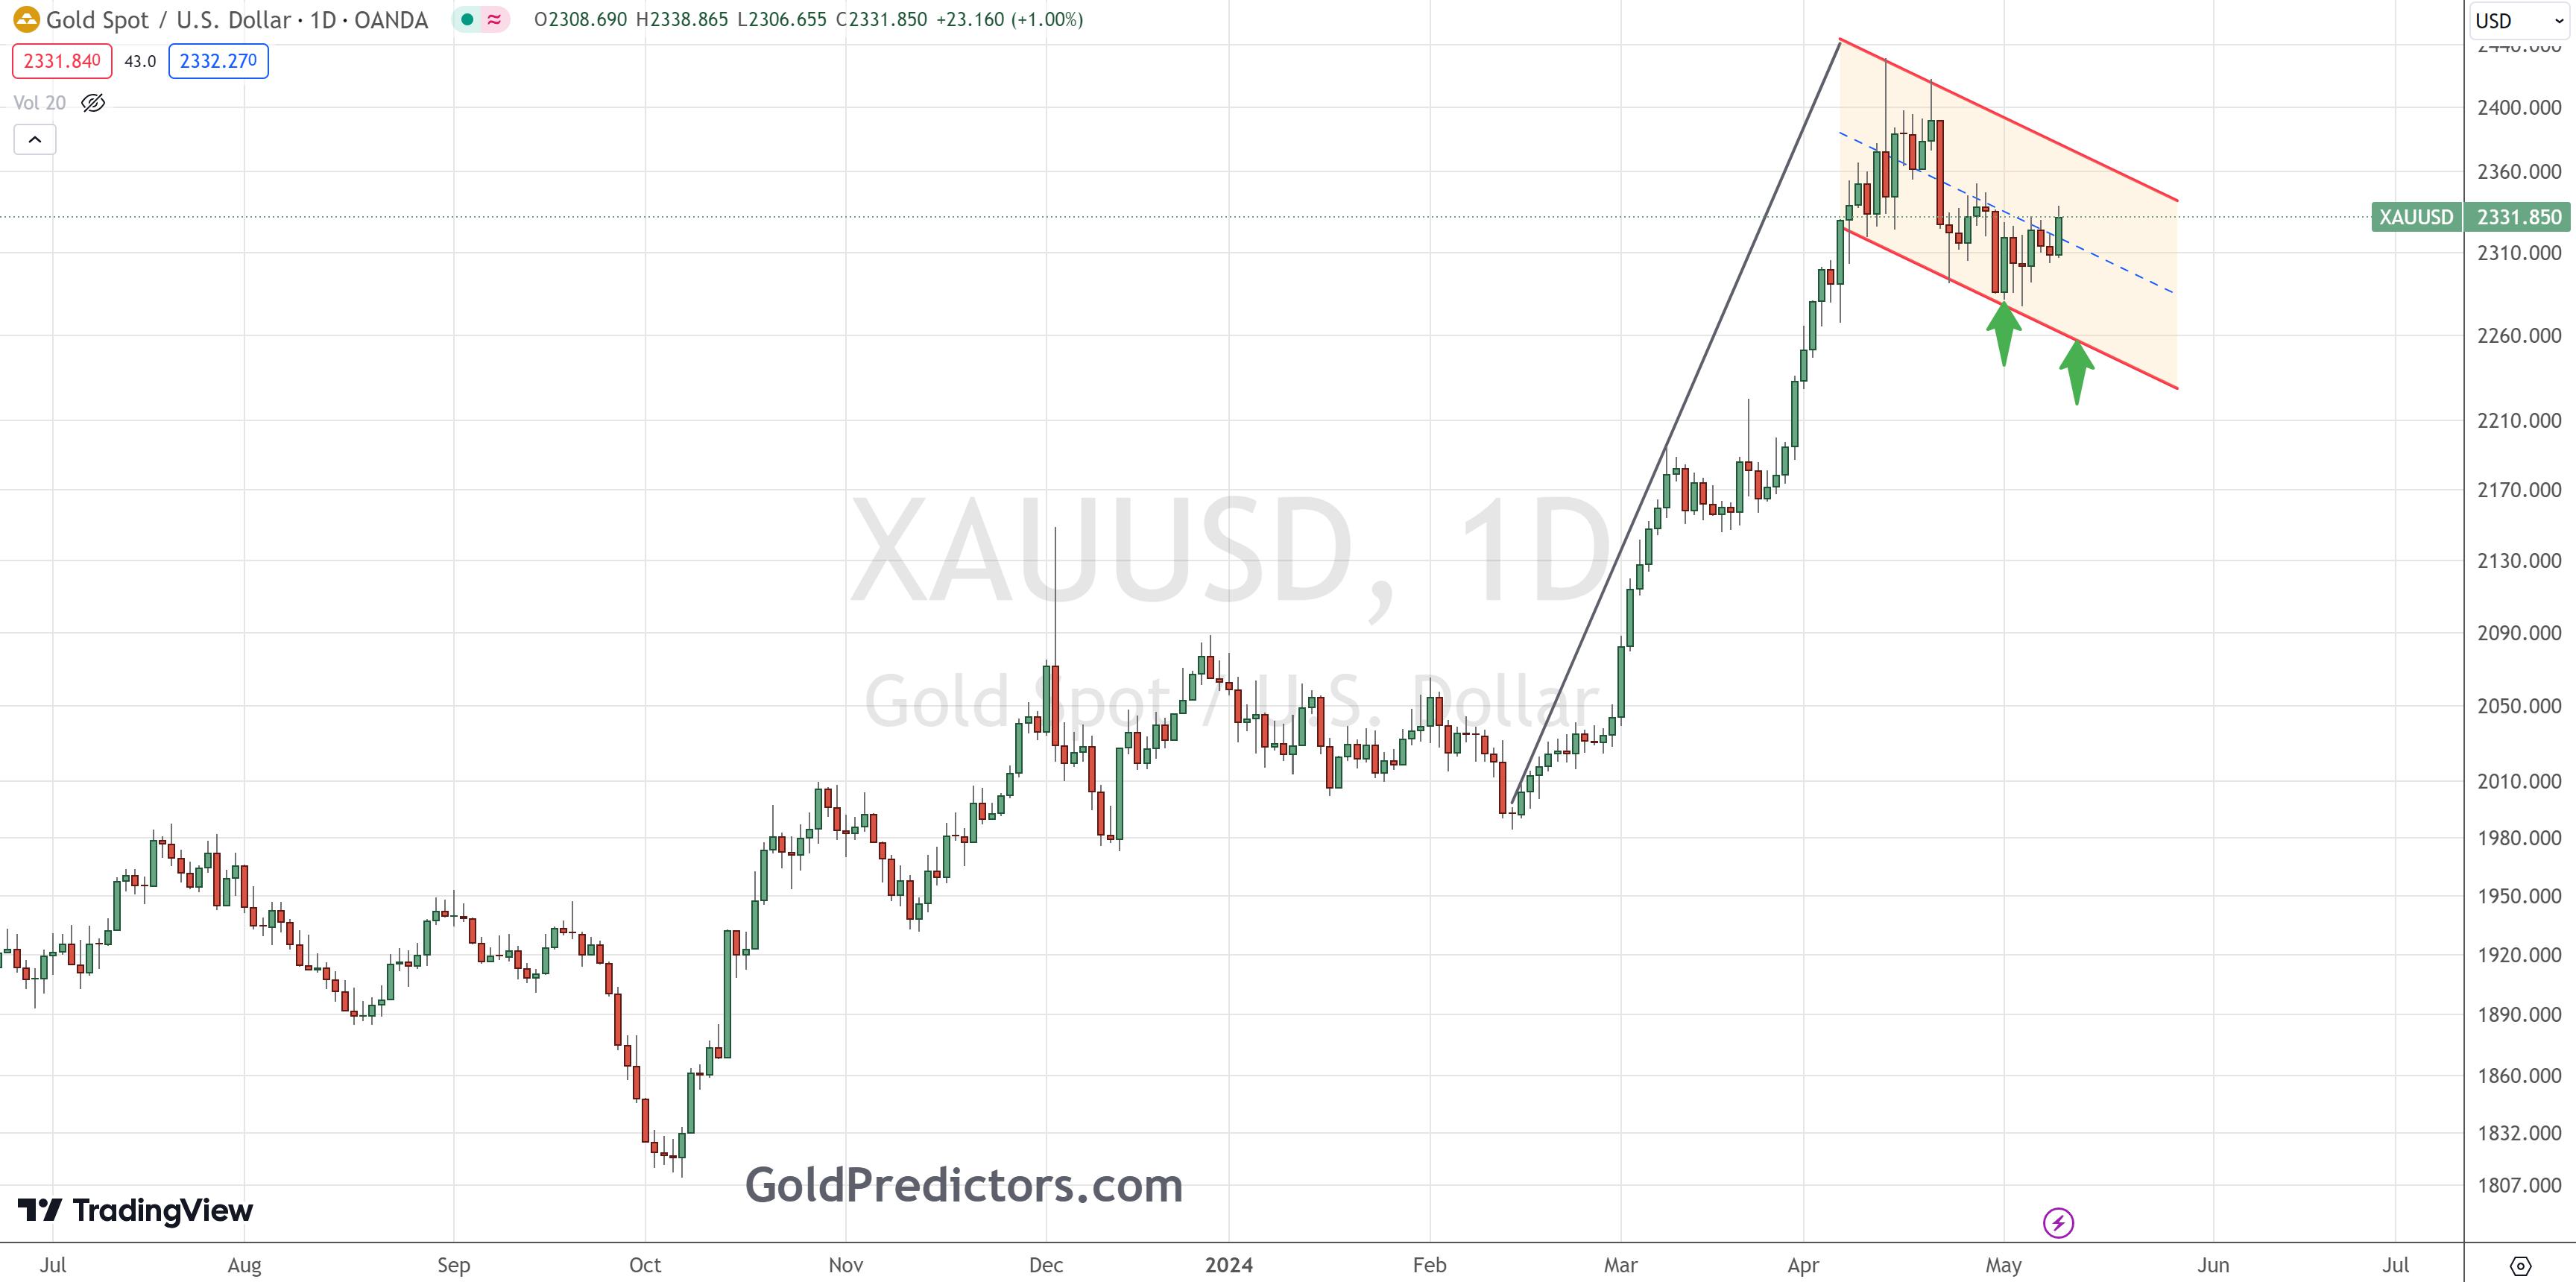 Gold prices poised for breakout as bull flag pattern signals upward surge